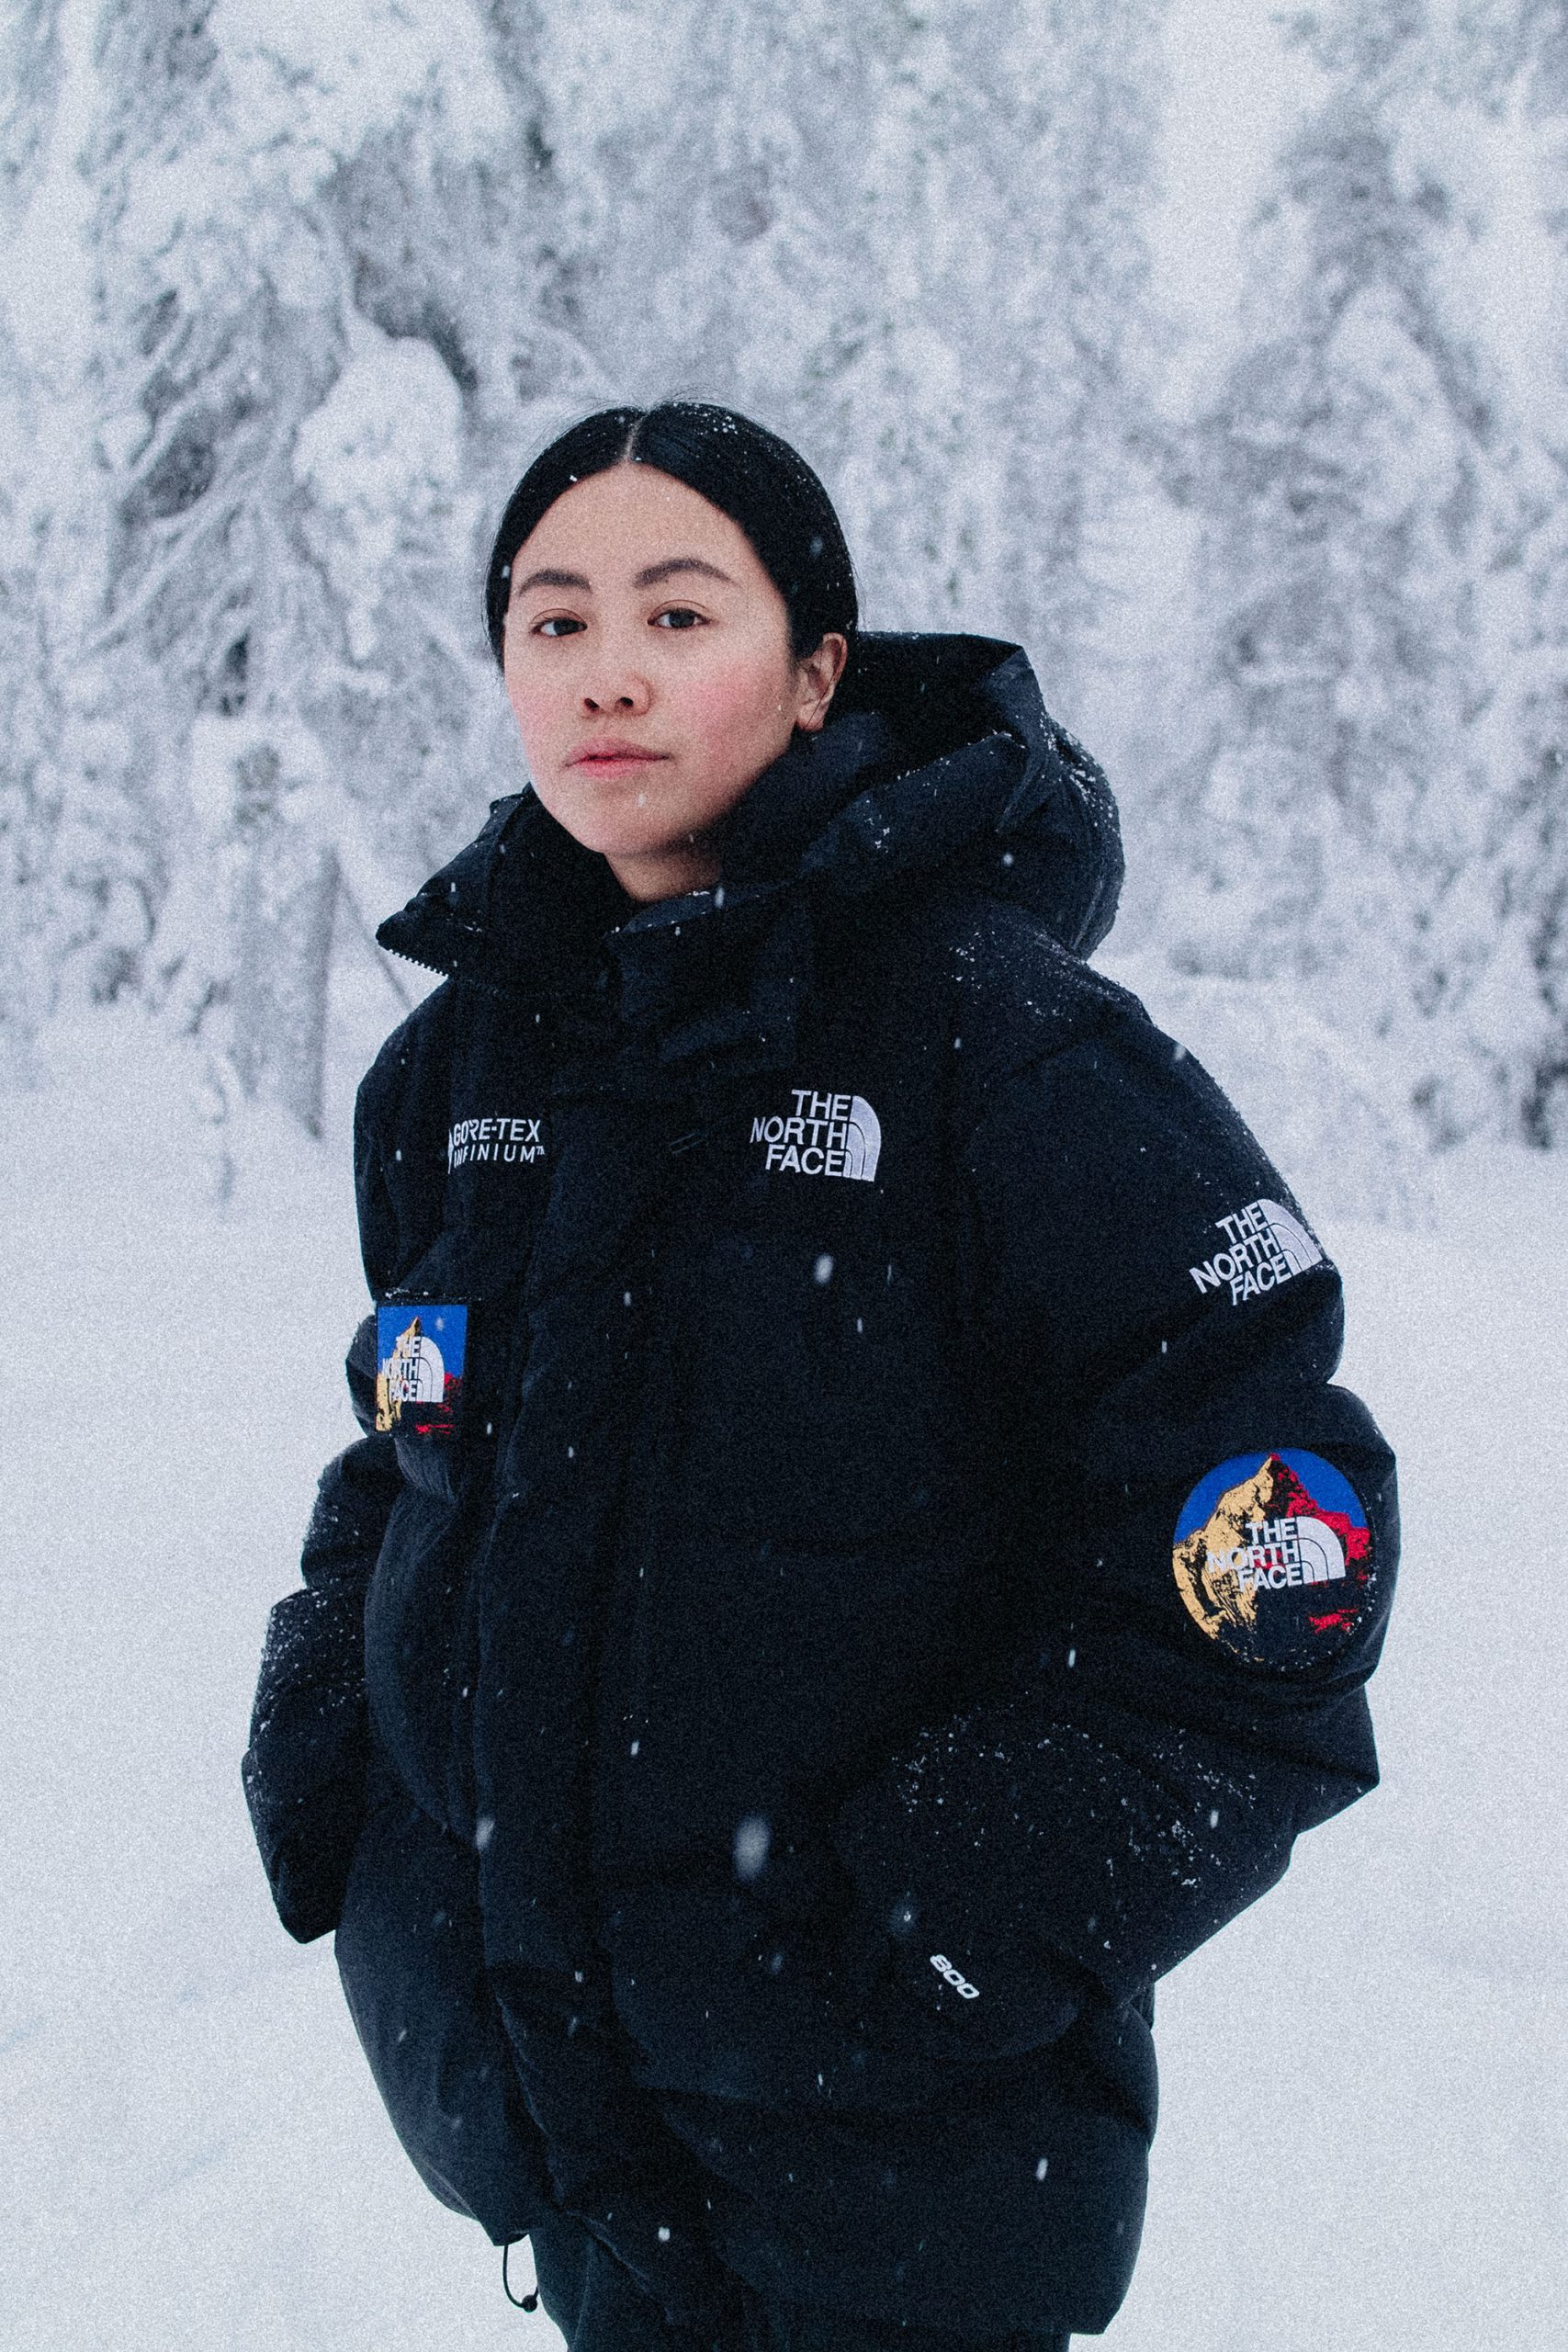 The North Face Seven Summit Collection / Lappi Travel Vlog & Quick Guide To Lappland, Finland by iHeartAlice.com - Travel, Lifestyle, Food & Fashionblog by Alice M. Huynh